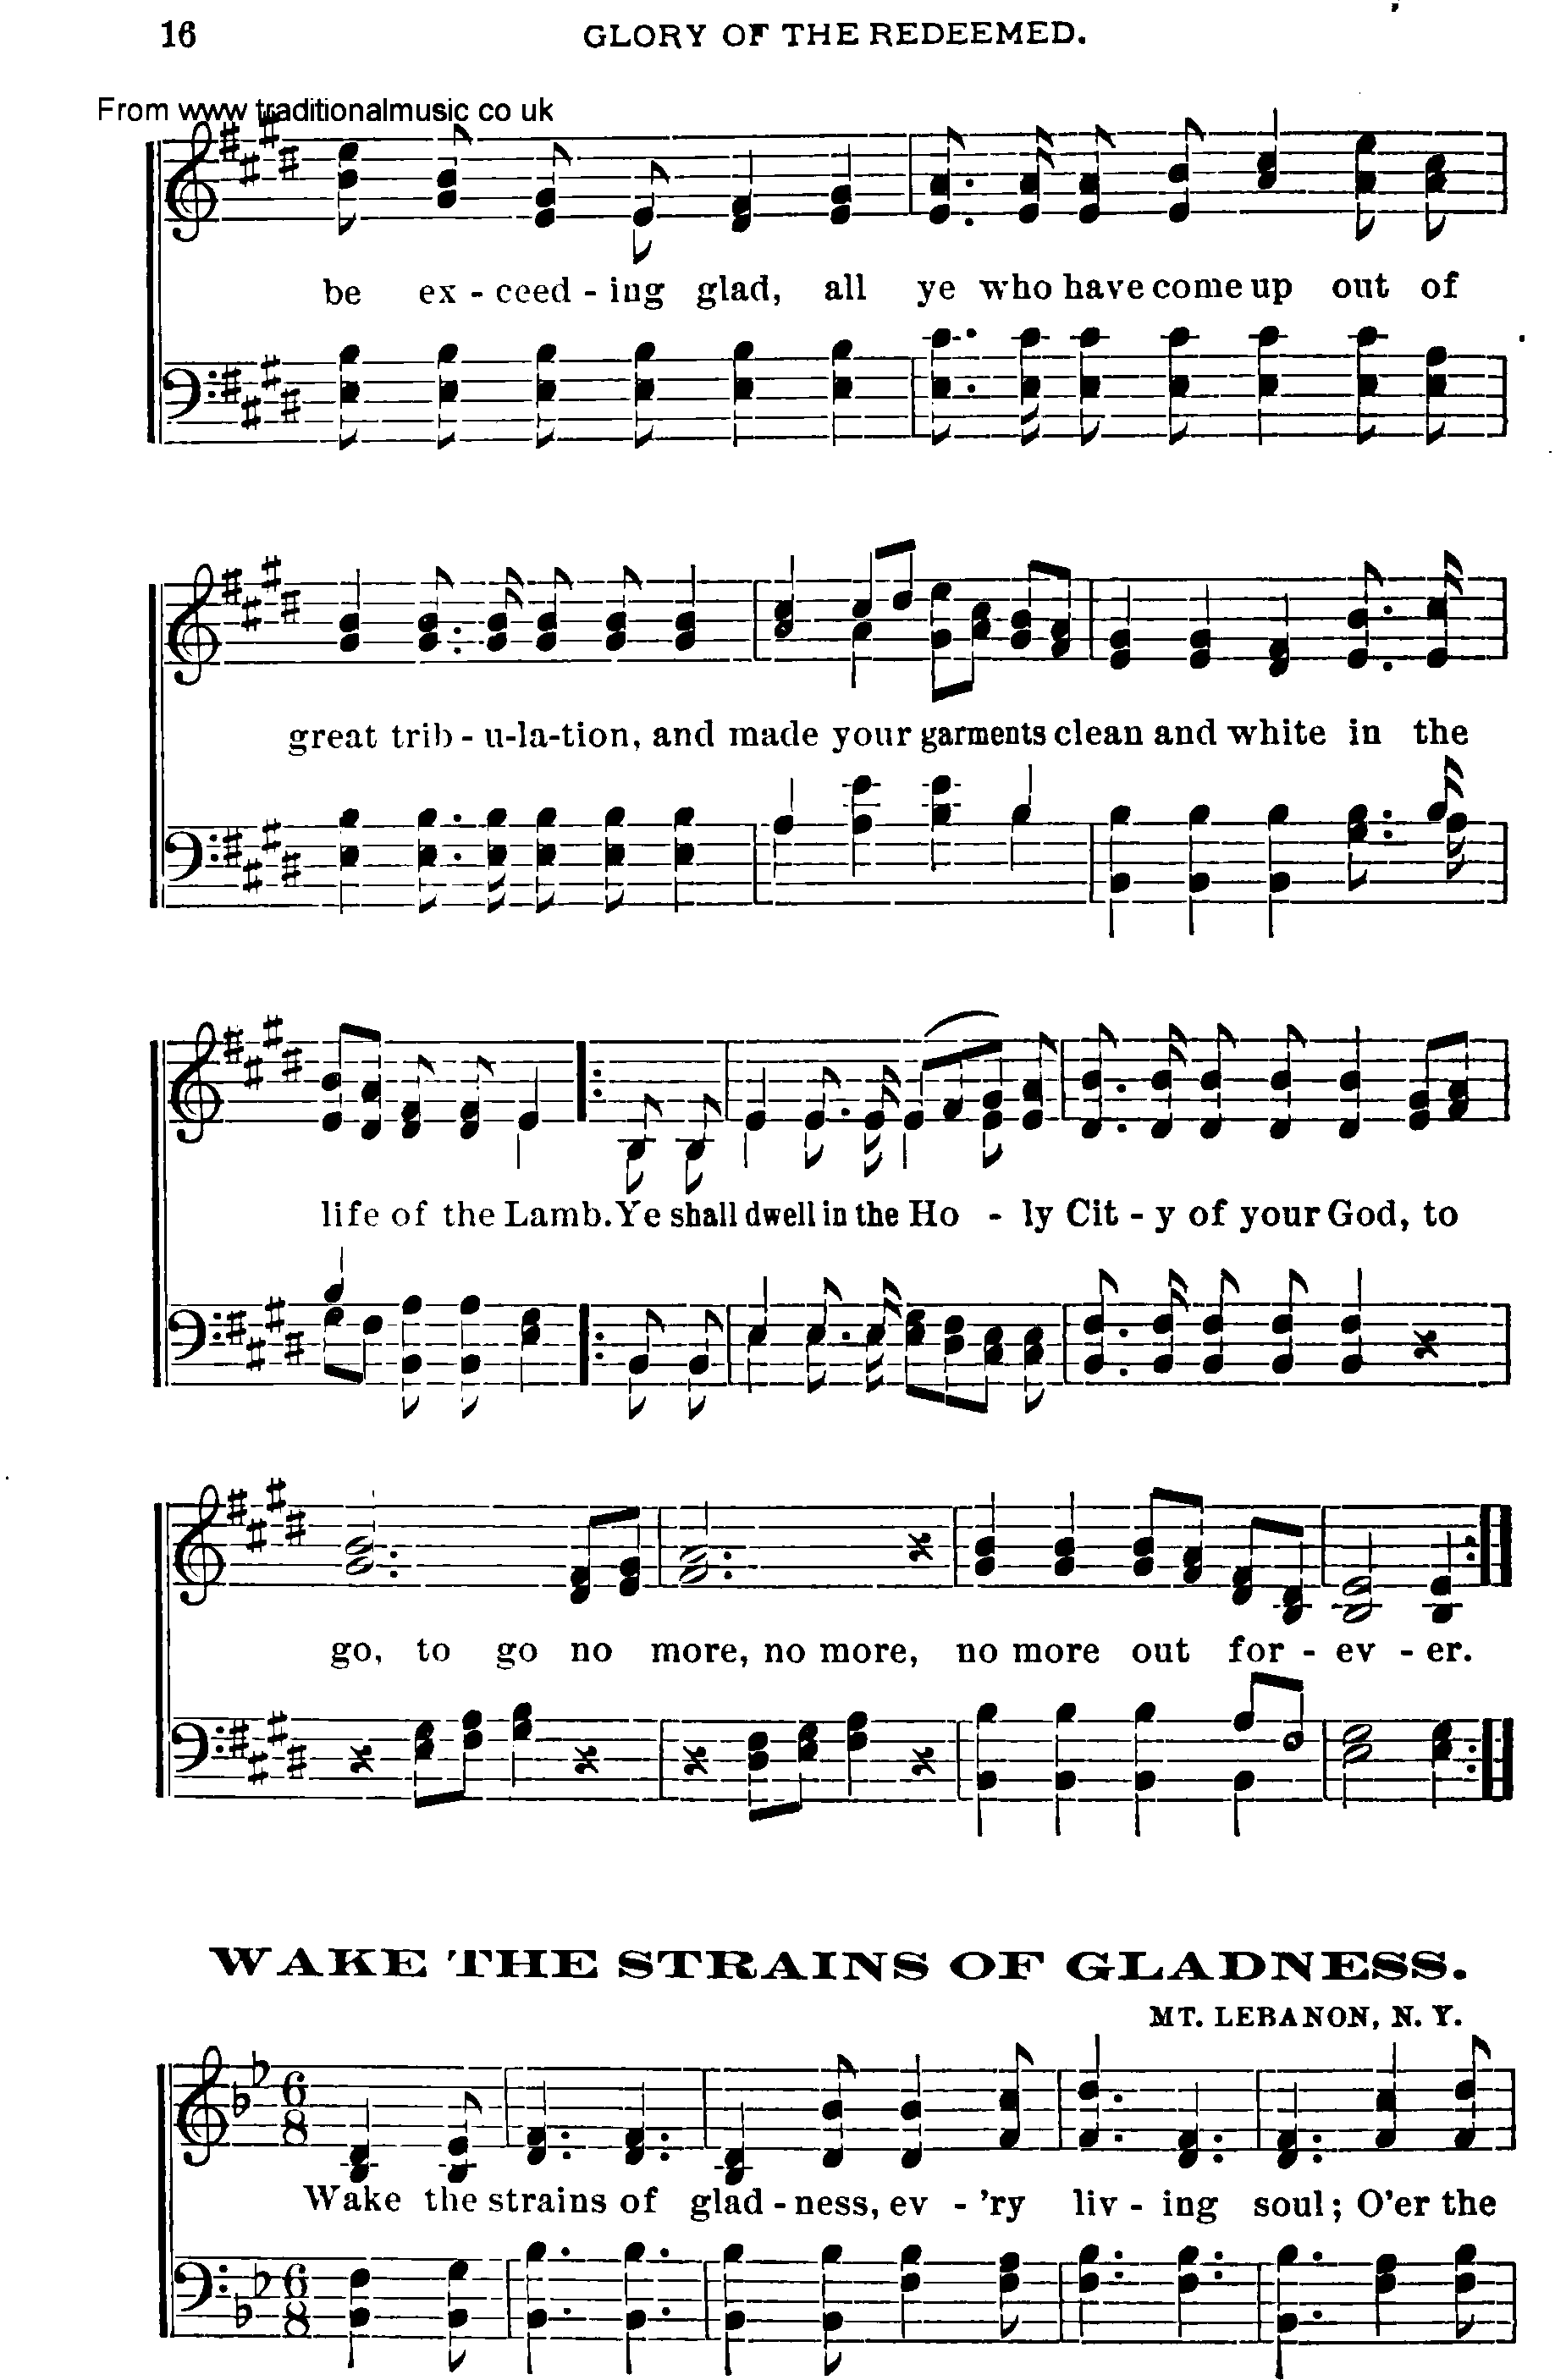 Shaker Music collection, Hymn: wake the strains of gladness, sheetmusic and PDF